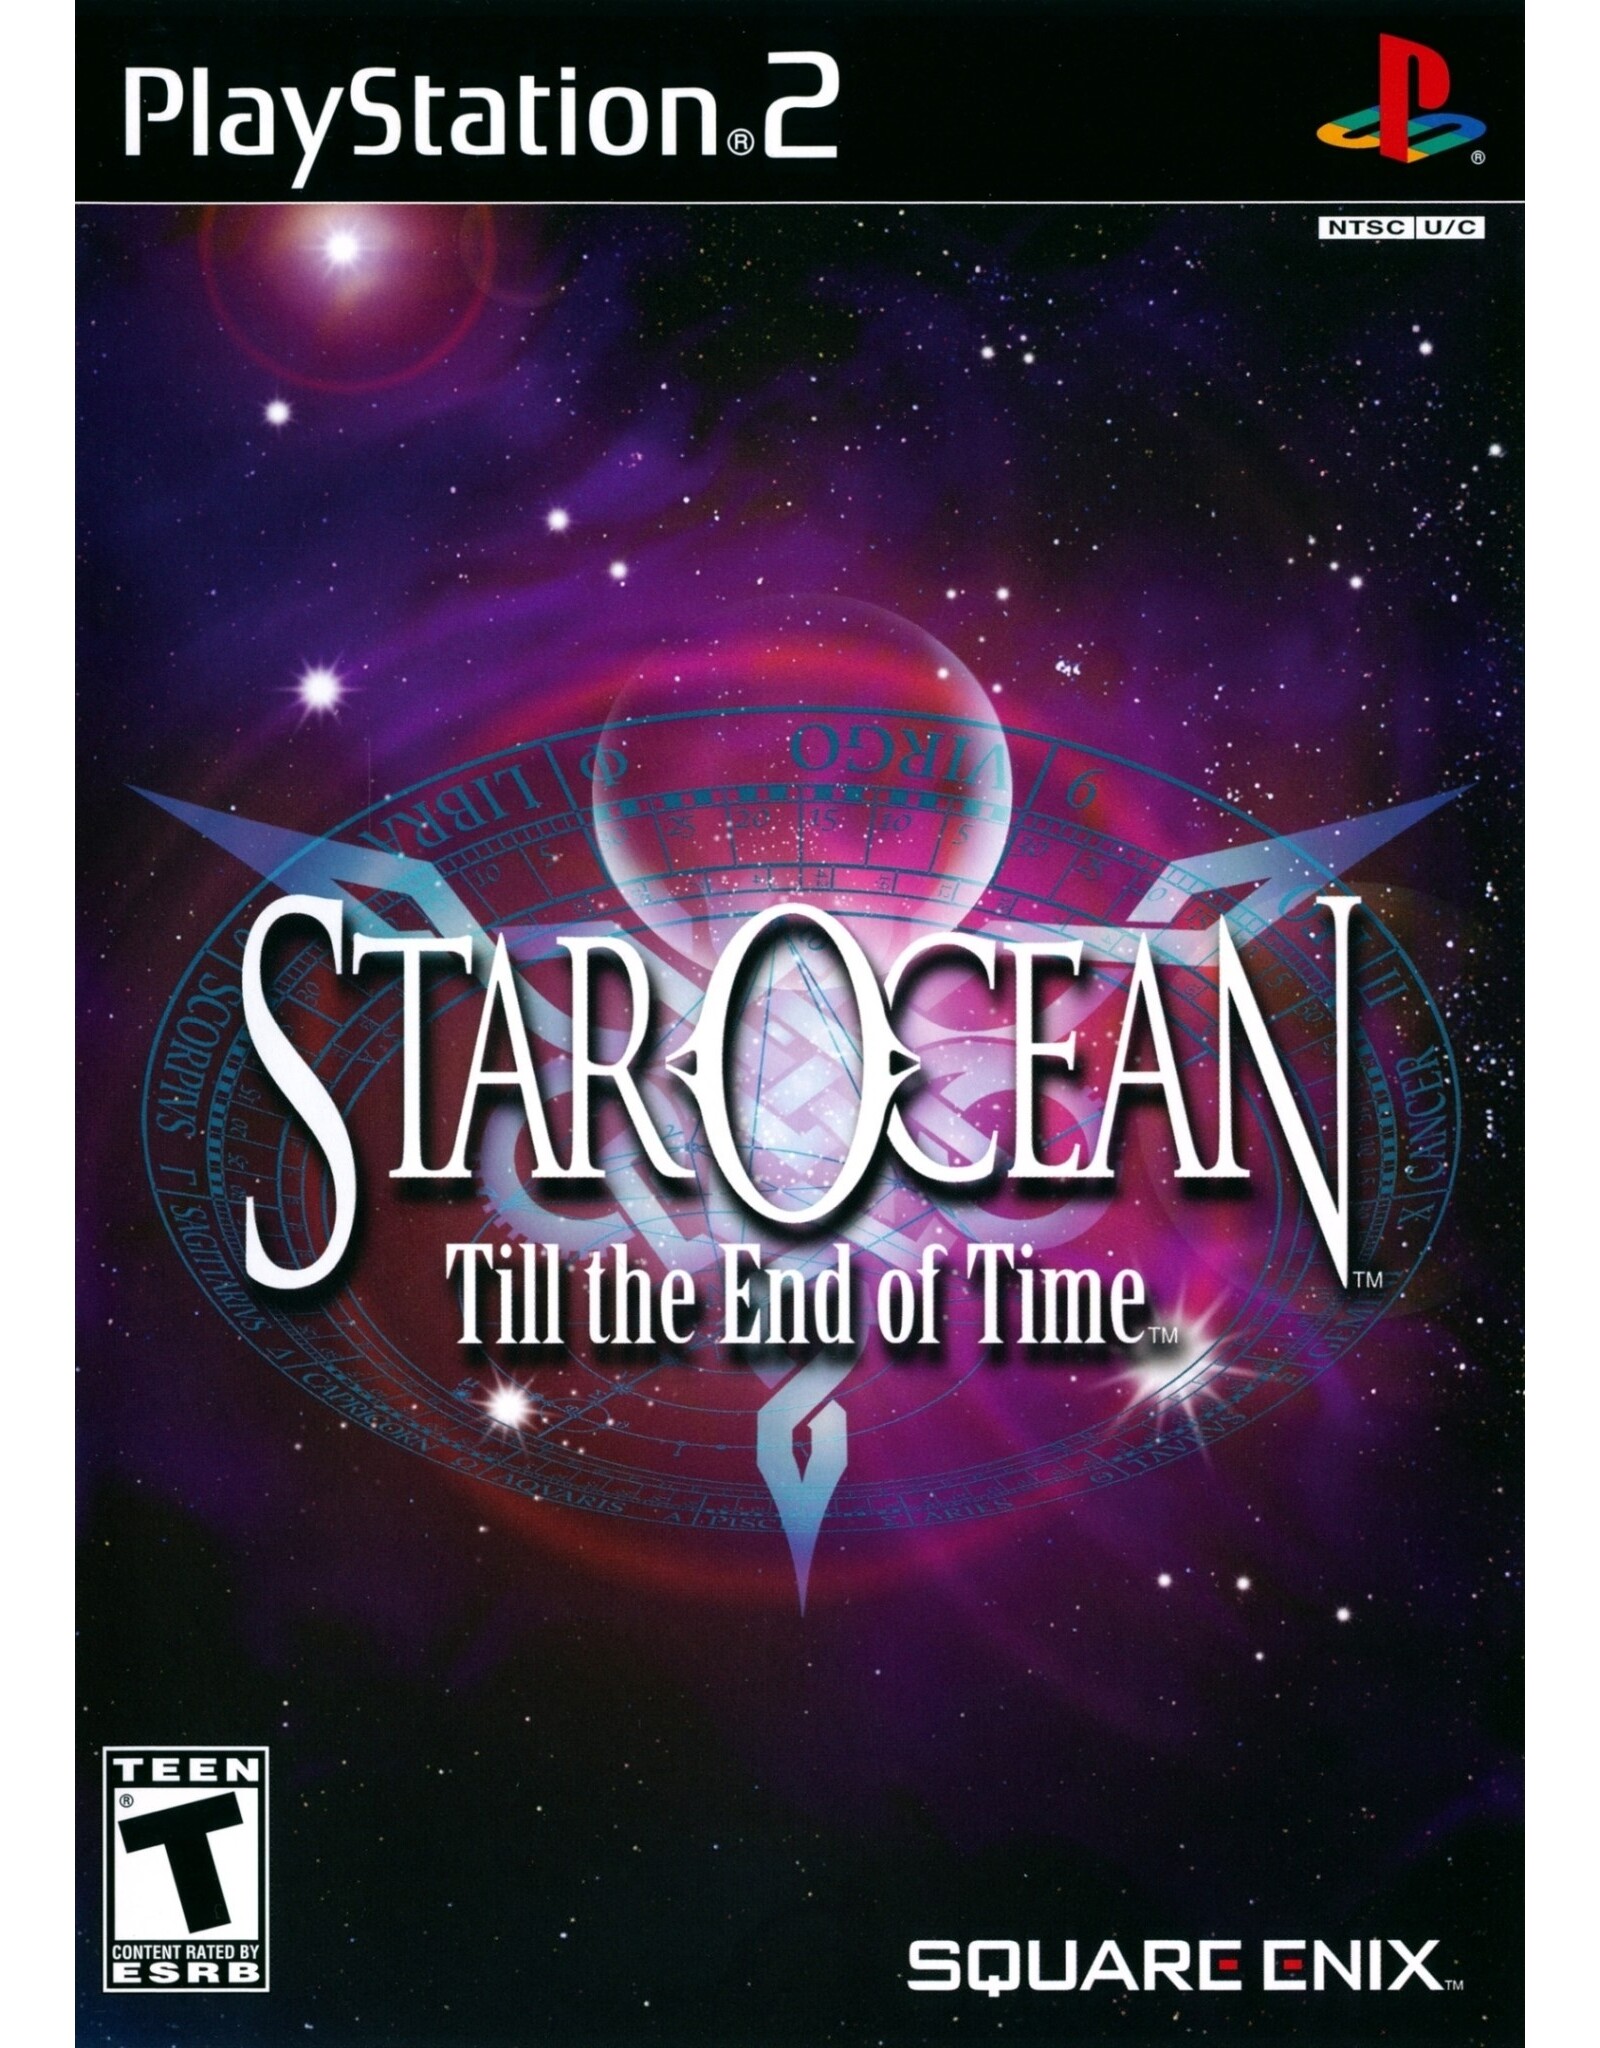 Playstation 2 Star Ocean Till the End of Time - No Outer Box (Used)